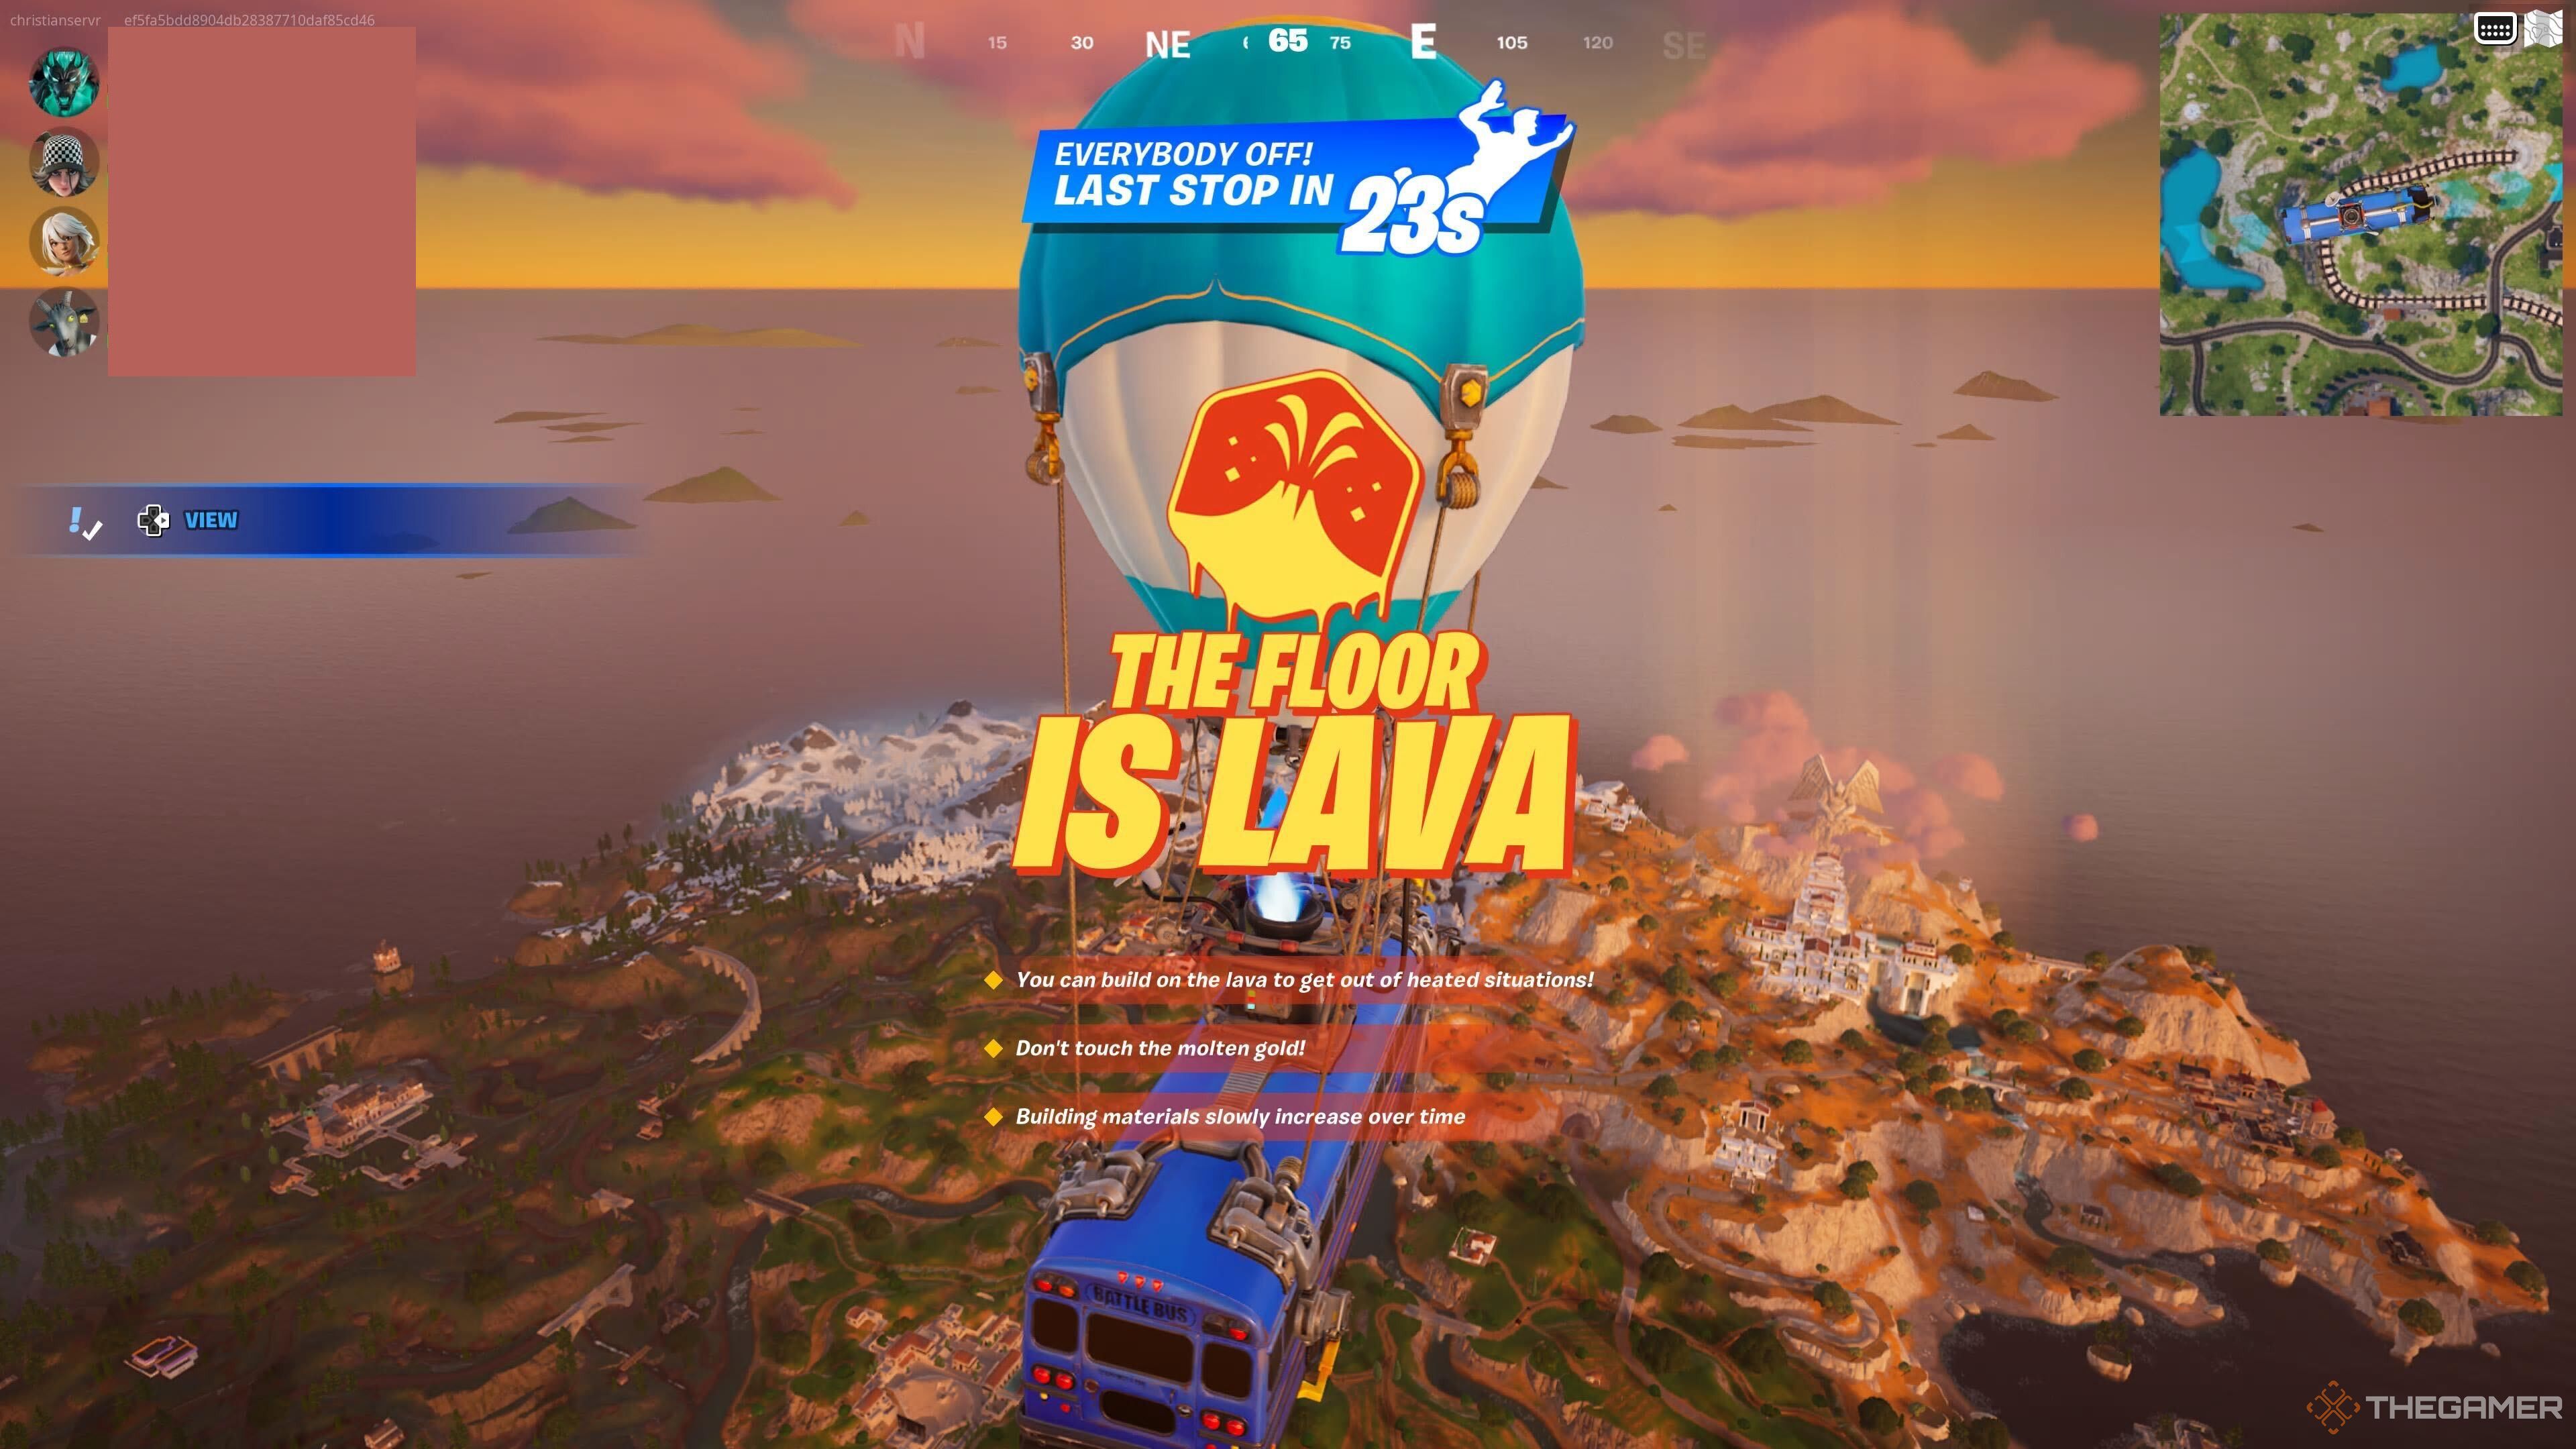 A screenshot from Fortnite Chapter Five Season Two's LTM Event, Midas Presents: The Floor Is Lava' with text reading that players can build on the lava, not to touch the molten gold, and building materials will increase over time.